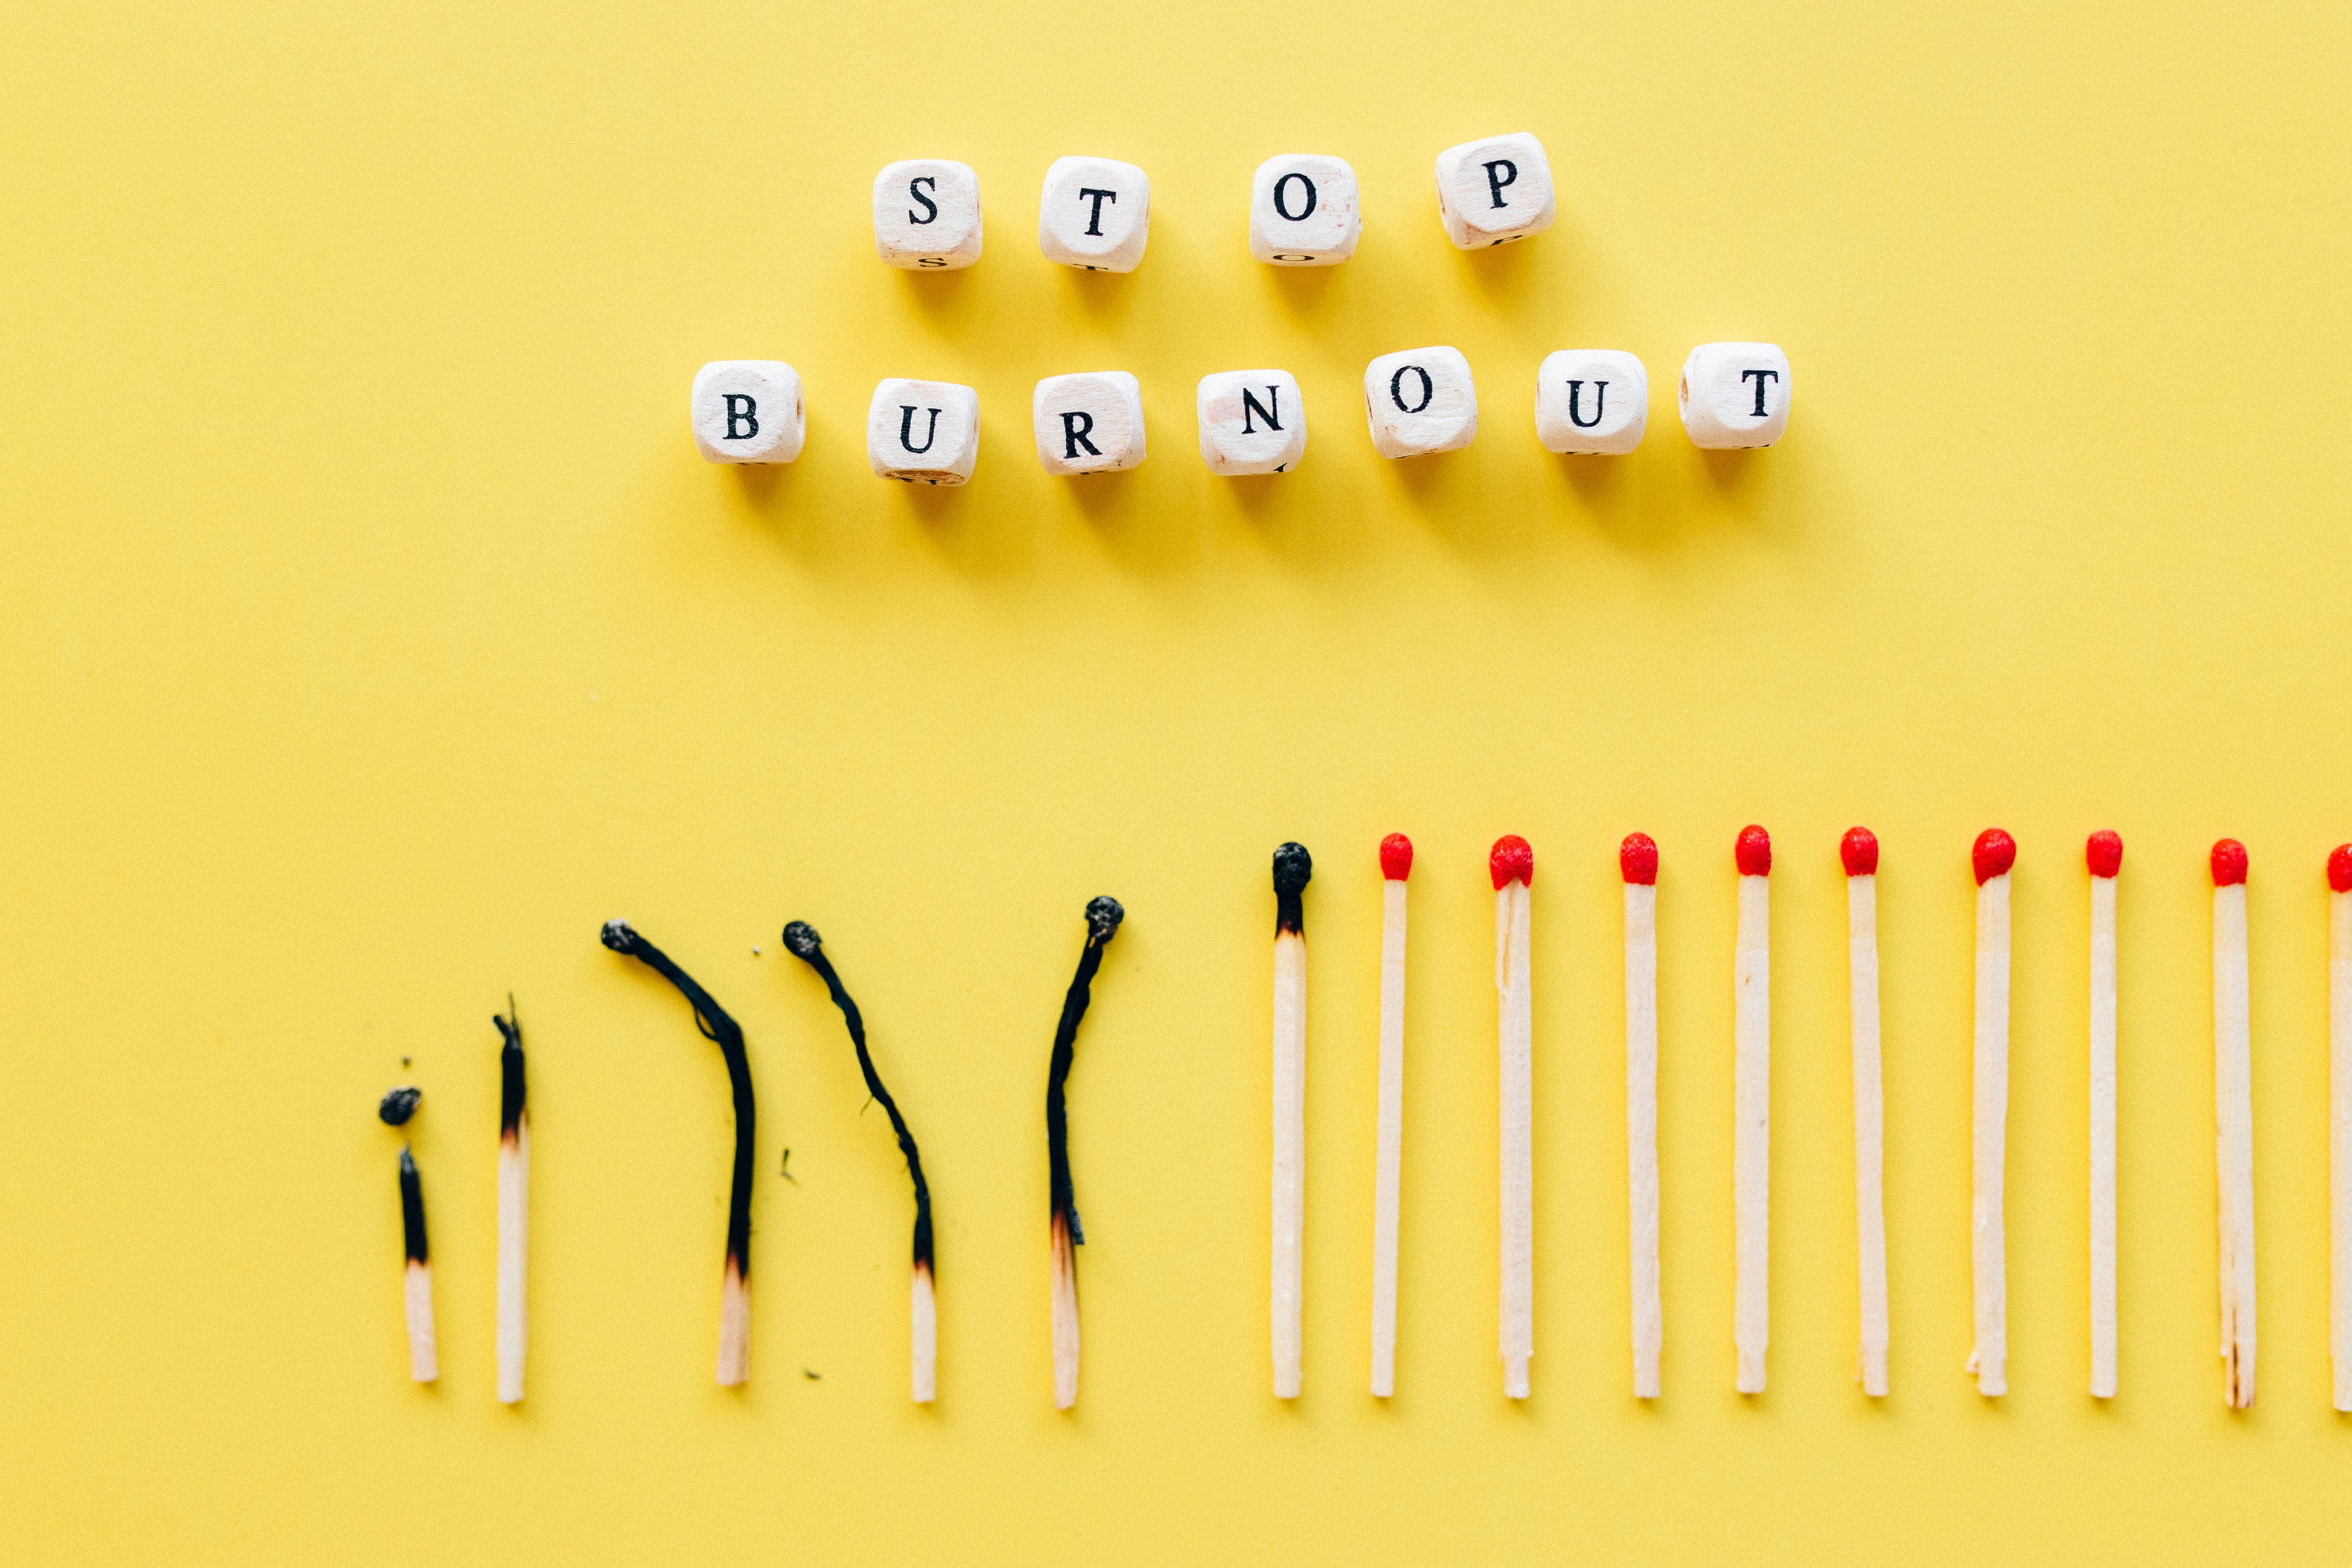 Stop autistic burnout and shutdown; image shows a line of matches, with some burnt and some not burnt.